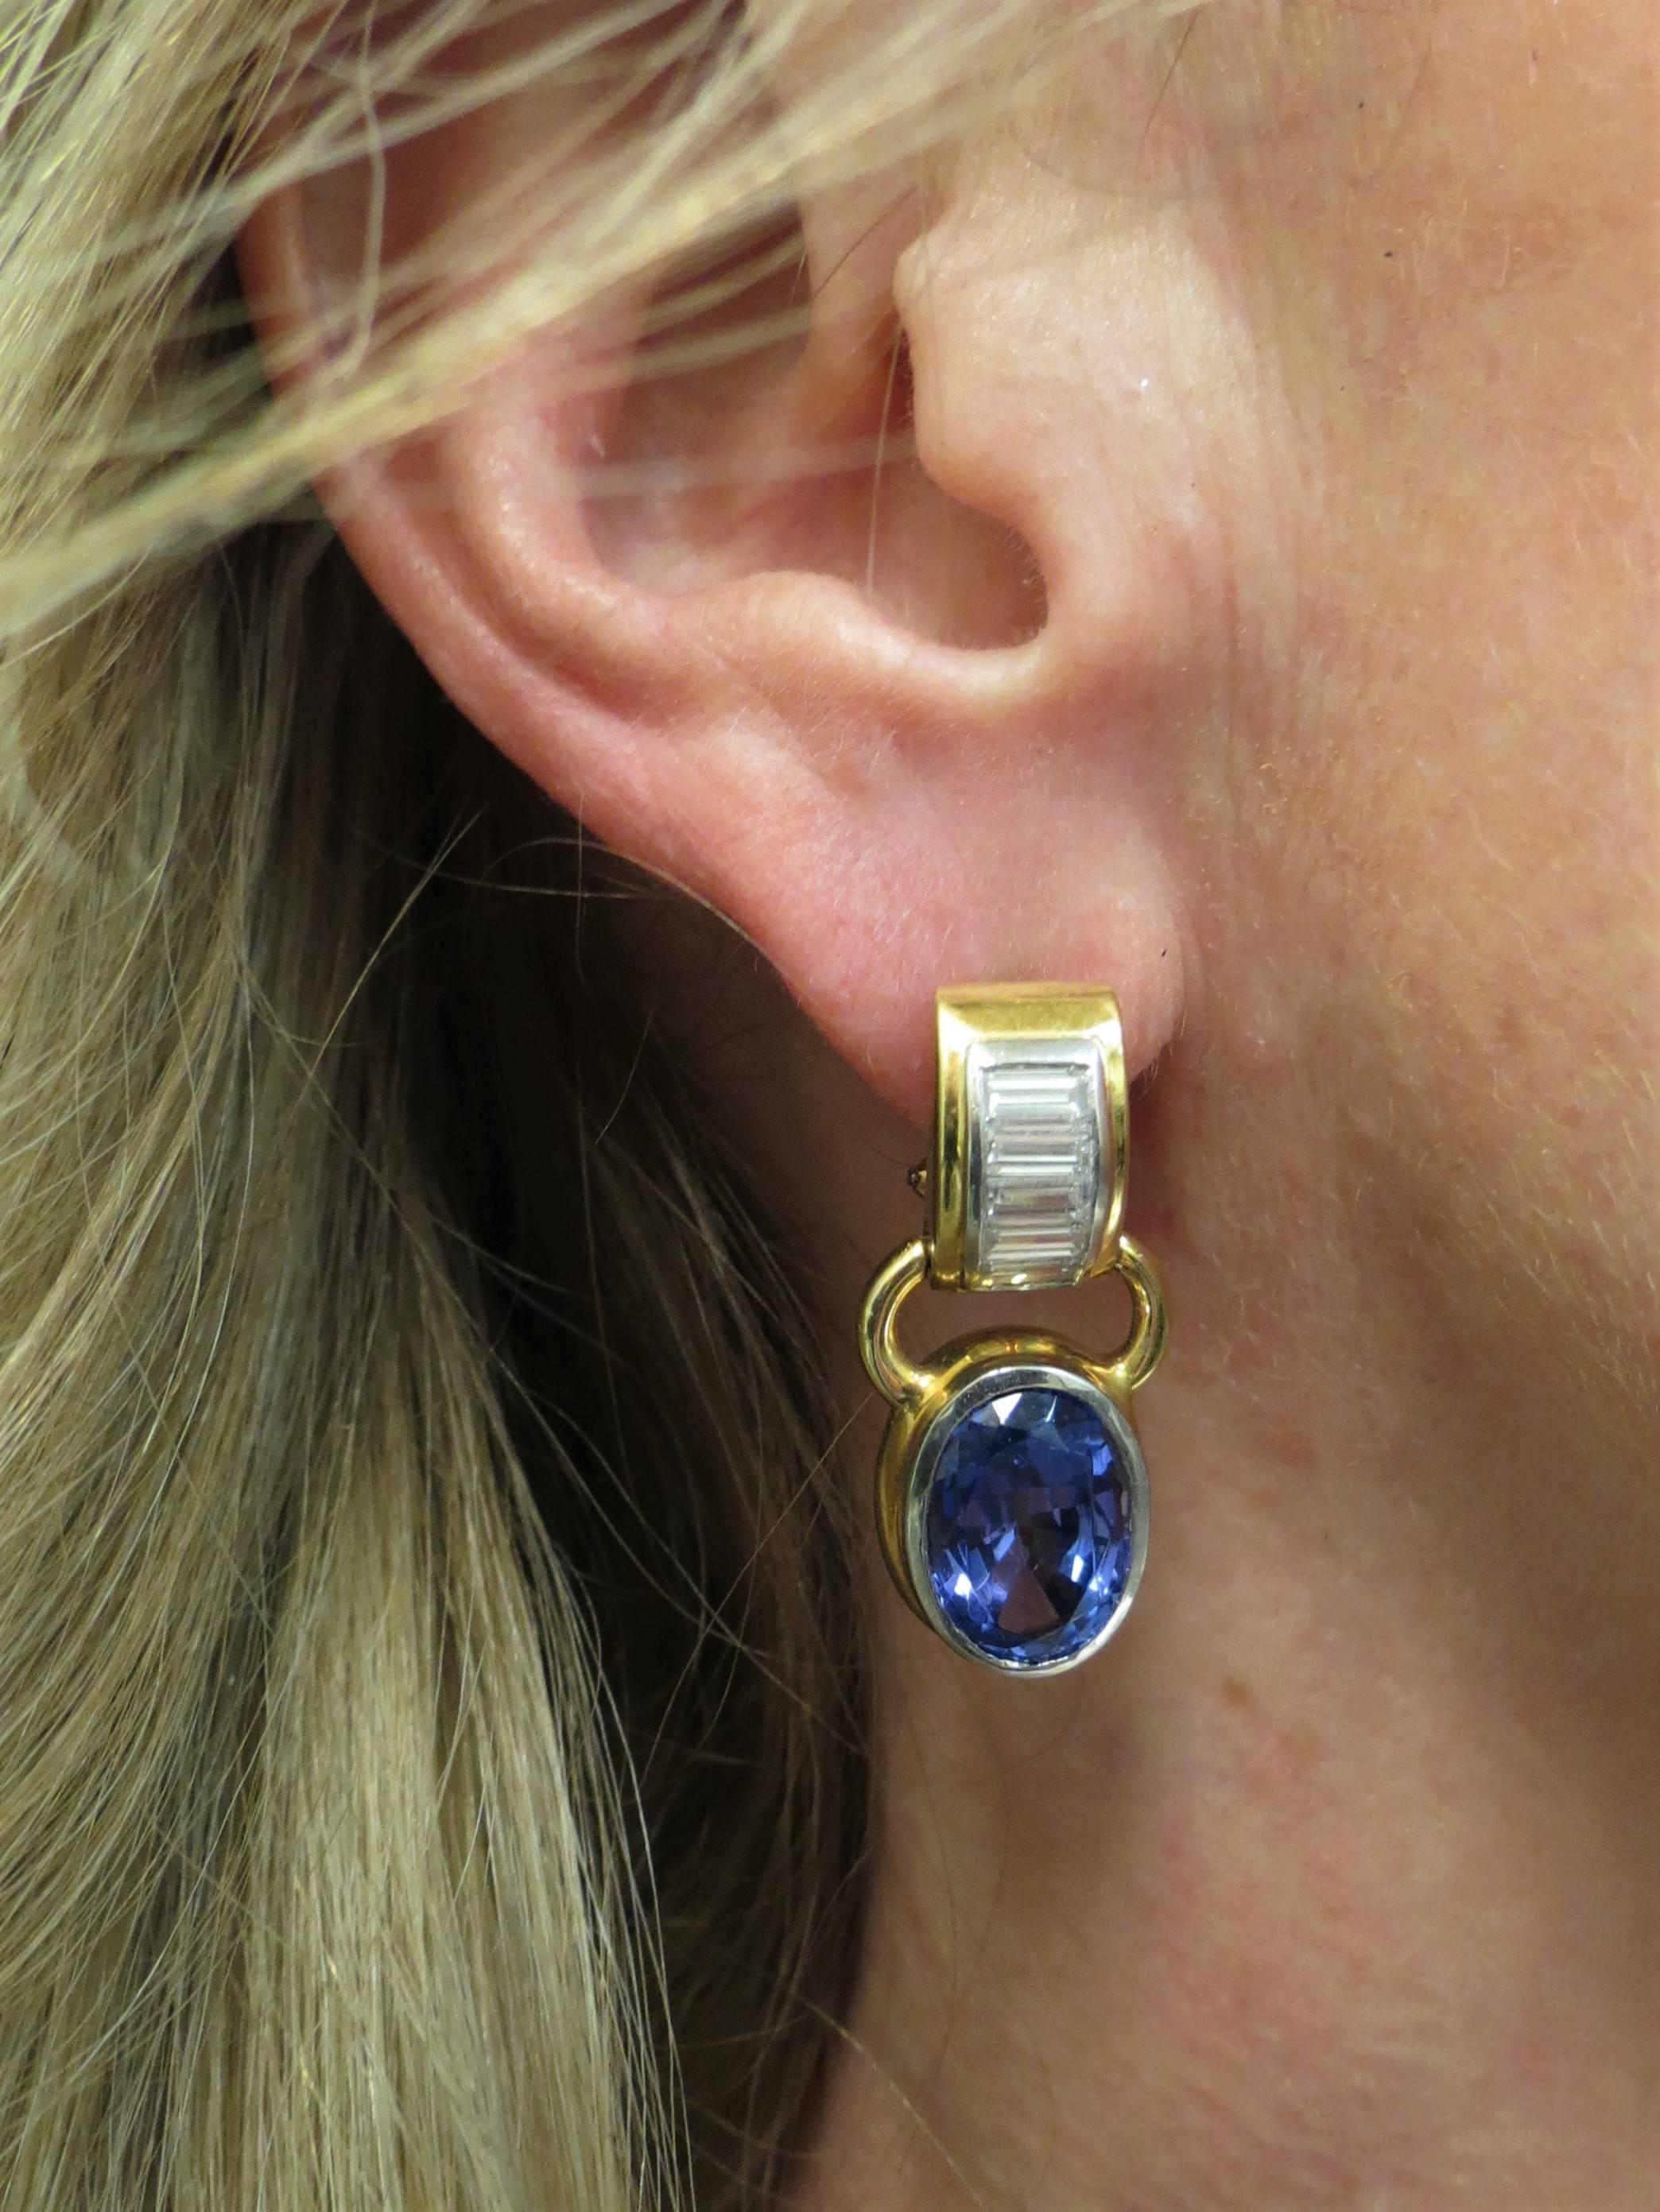 18K yellow gold and platinum earrings, by Susan Berman, bezel set with two oval faceted Tanzanites weighing 11.45ct total and 10 channel set Baguette diamonds weighing. 1.59cts total
Original retail: $12,500
